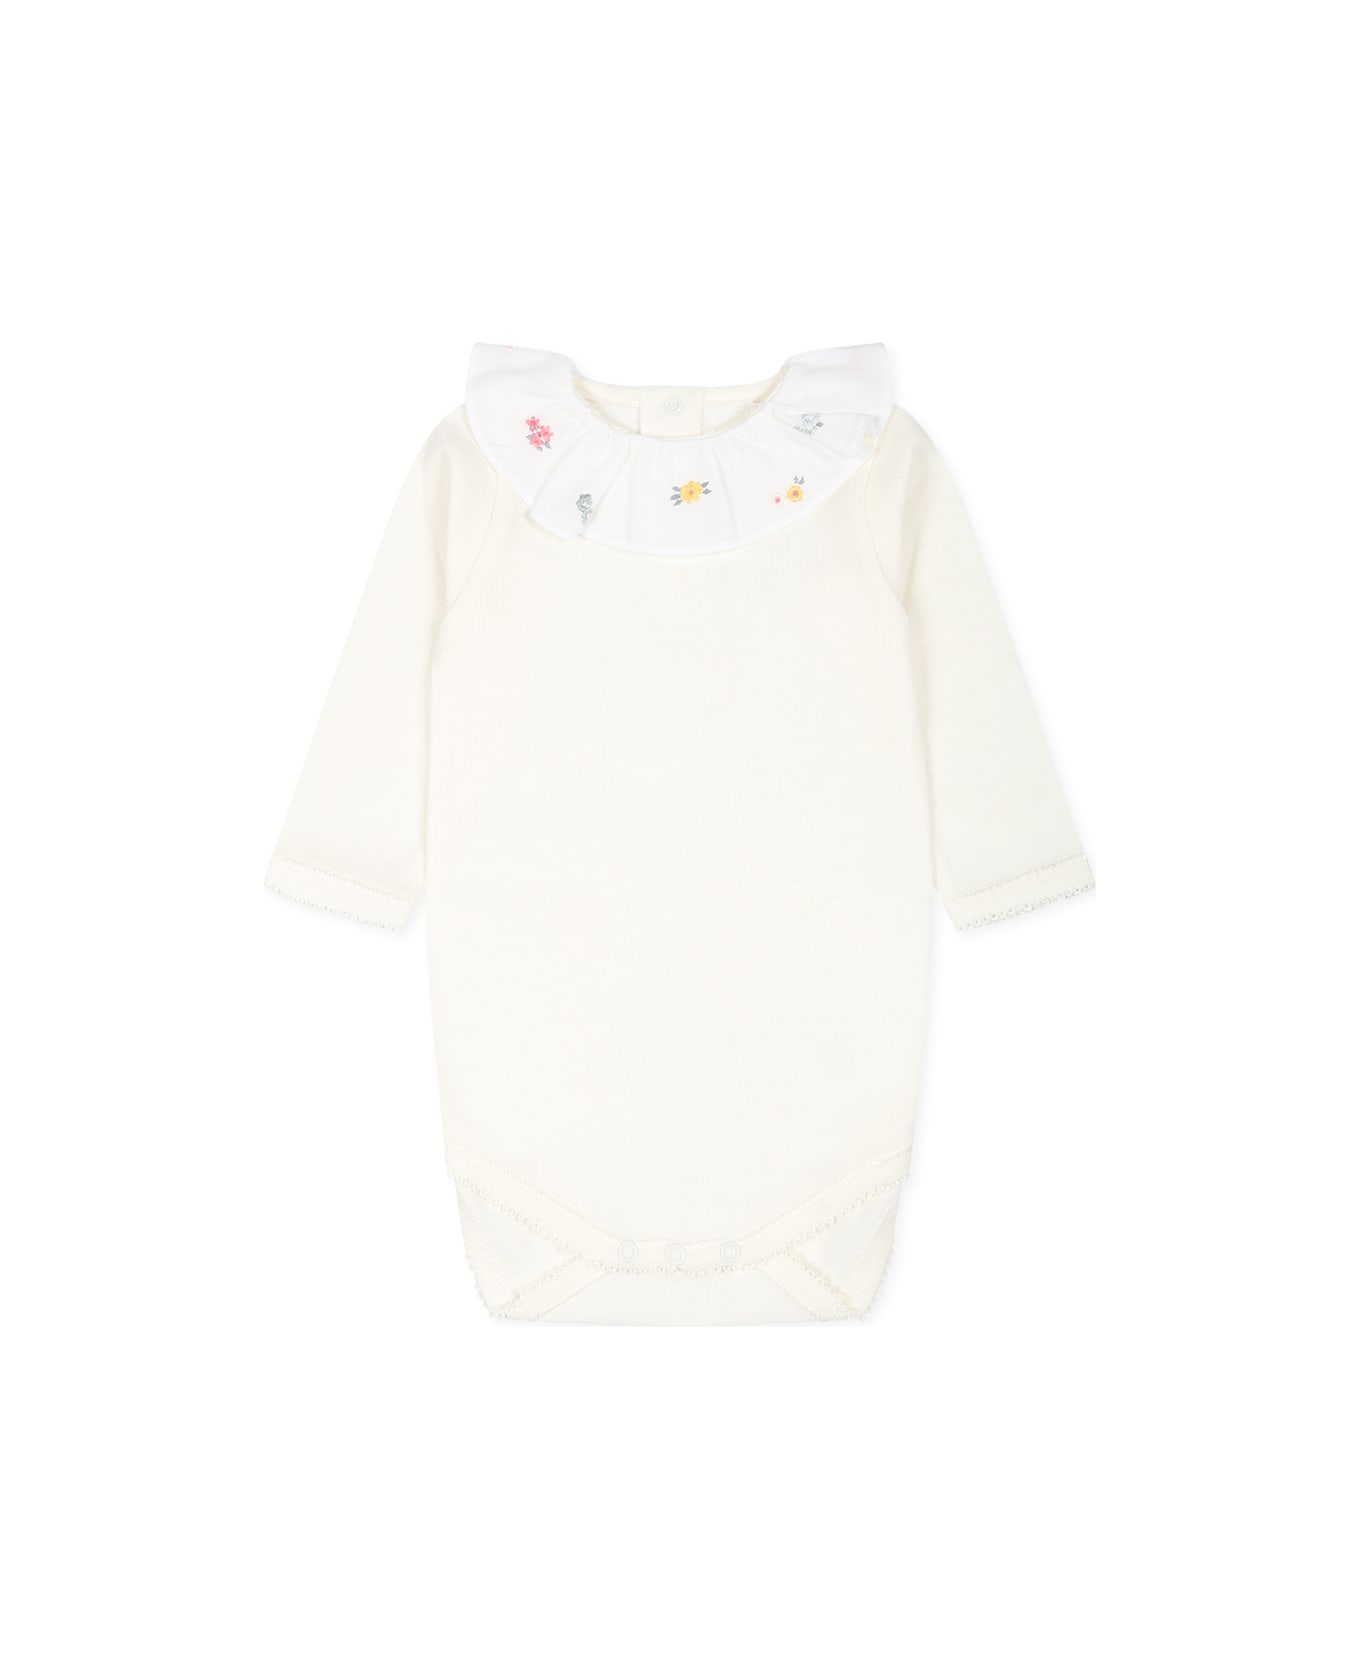 Bonpoint White Bodysuit For Baby Girl With Flowers - White